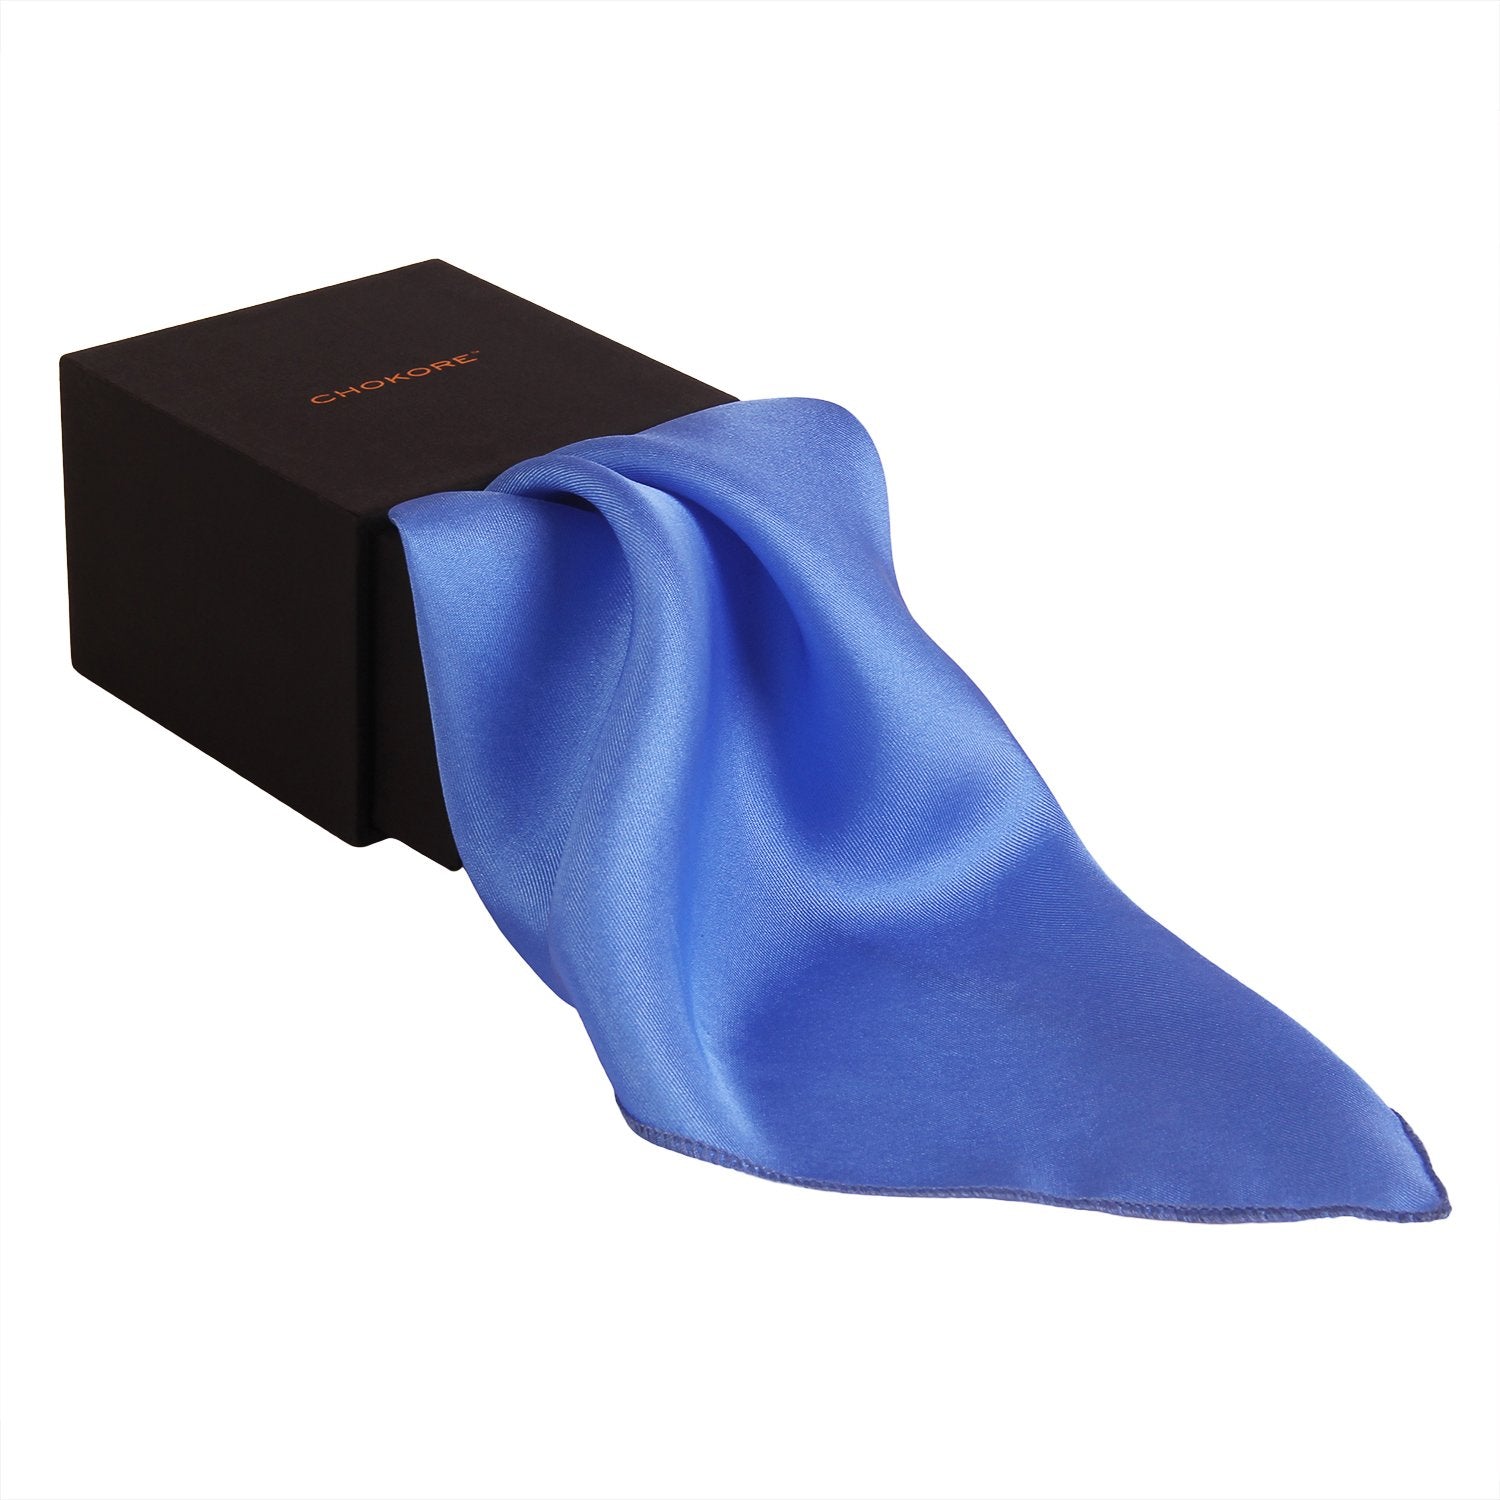 Chokore Marina Pure Silk Pocket Square, from the Solids Line